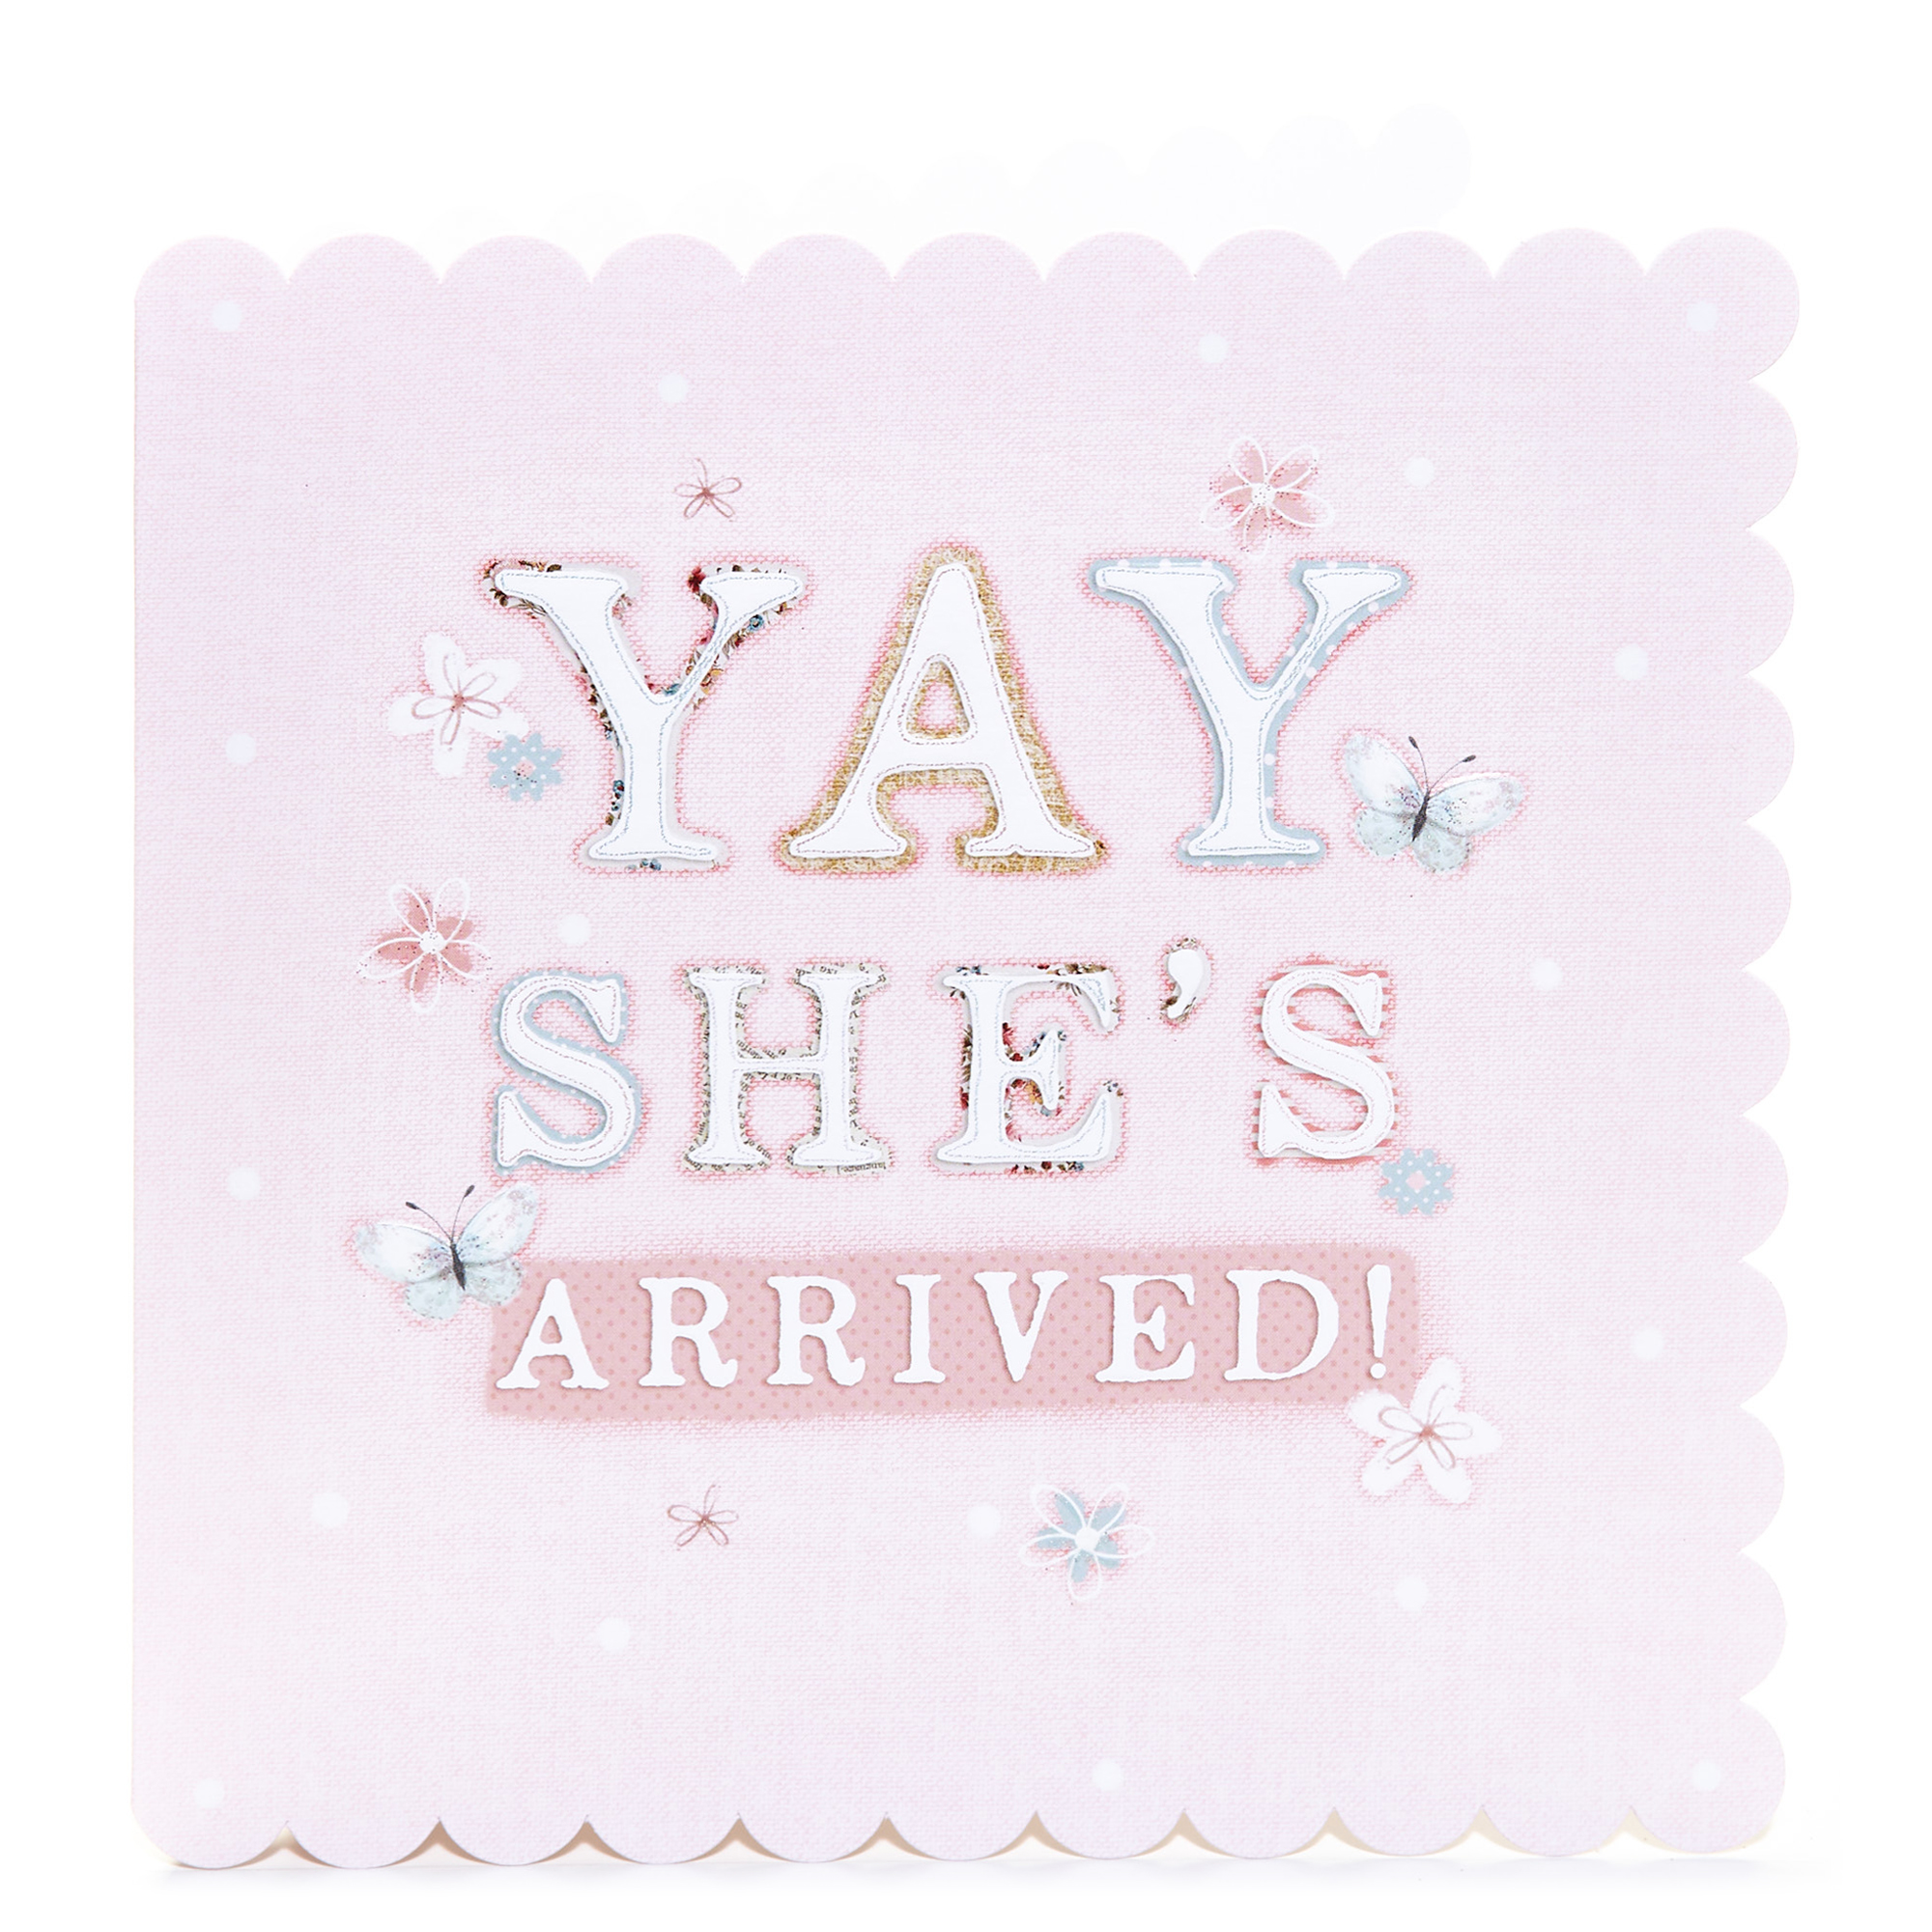 New Baby Card - Yay She's Arrived!